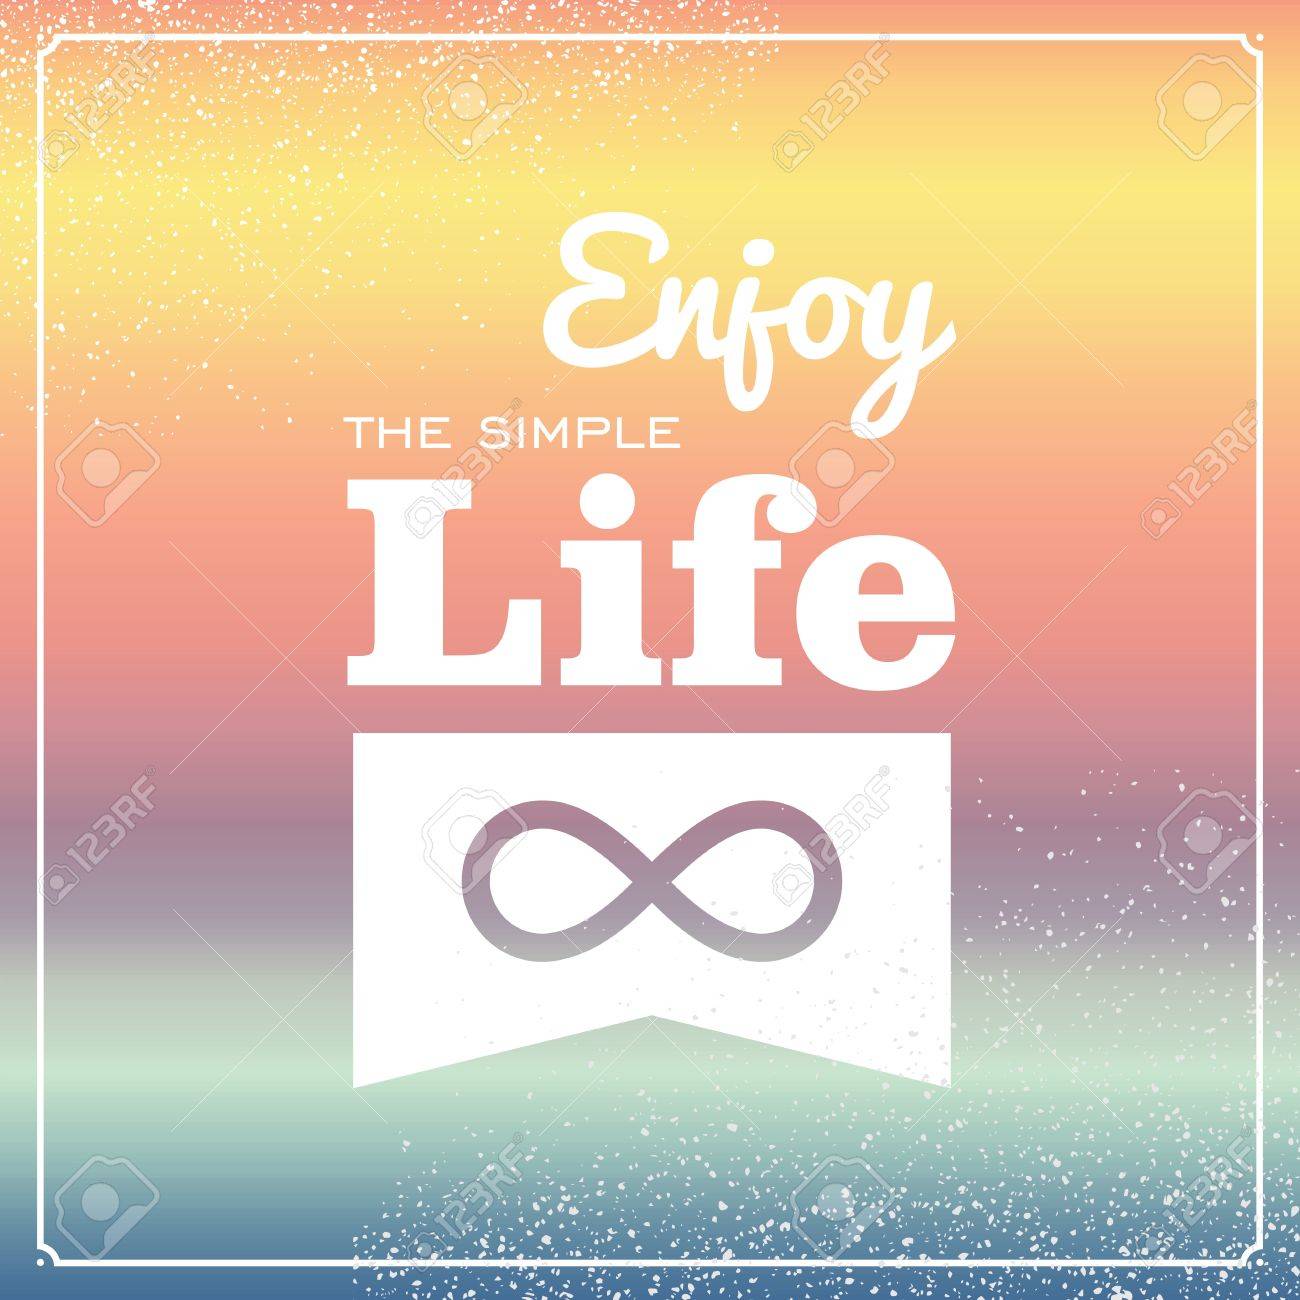 Vintage Enjoy The Simple Life Wallpaper Royalty SVG Cliparts 1300x1300